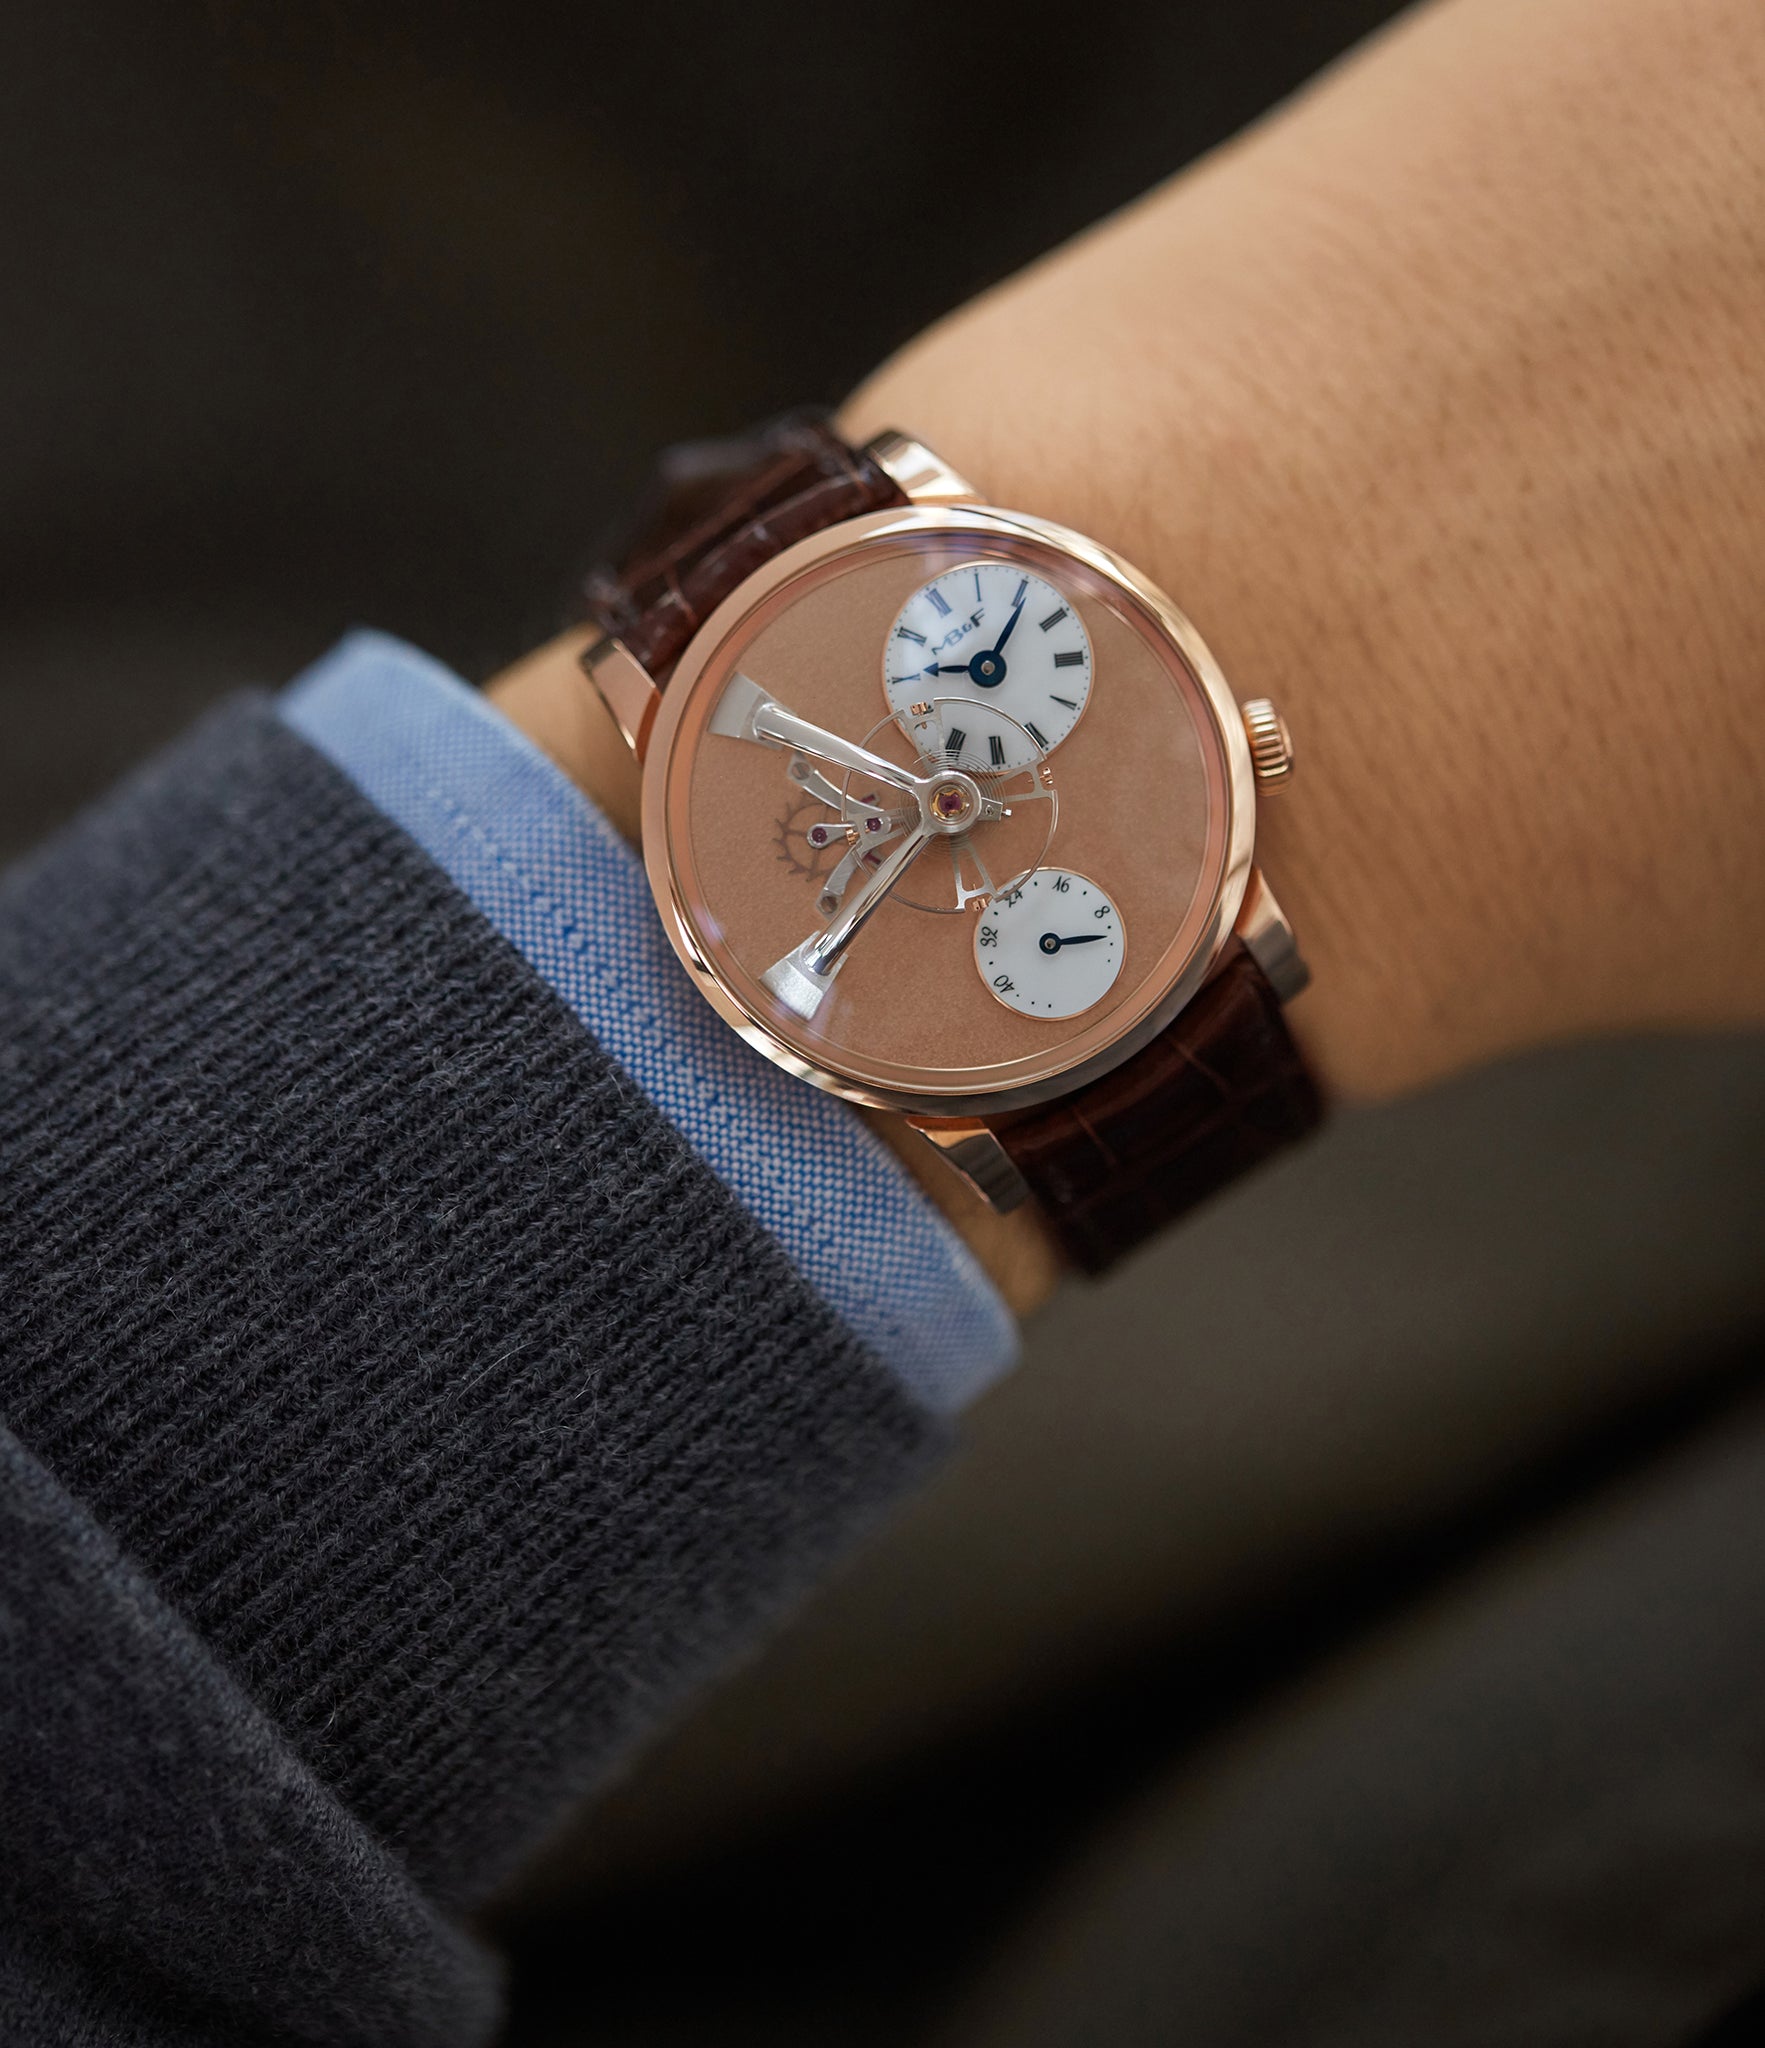 on the wrist MB&F Legacy Machine LM101 Limited Edition rose gold watch by Max Busser and Voutilainen for sale online at A Collected Man London UK specialist of rare, independent watchmakers